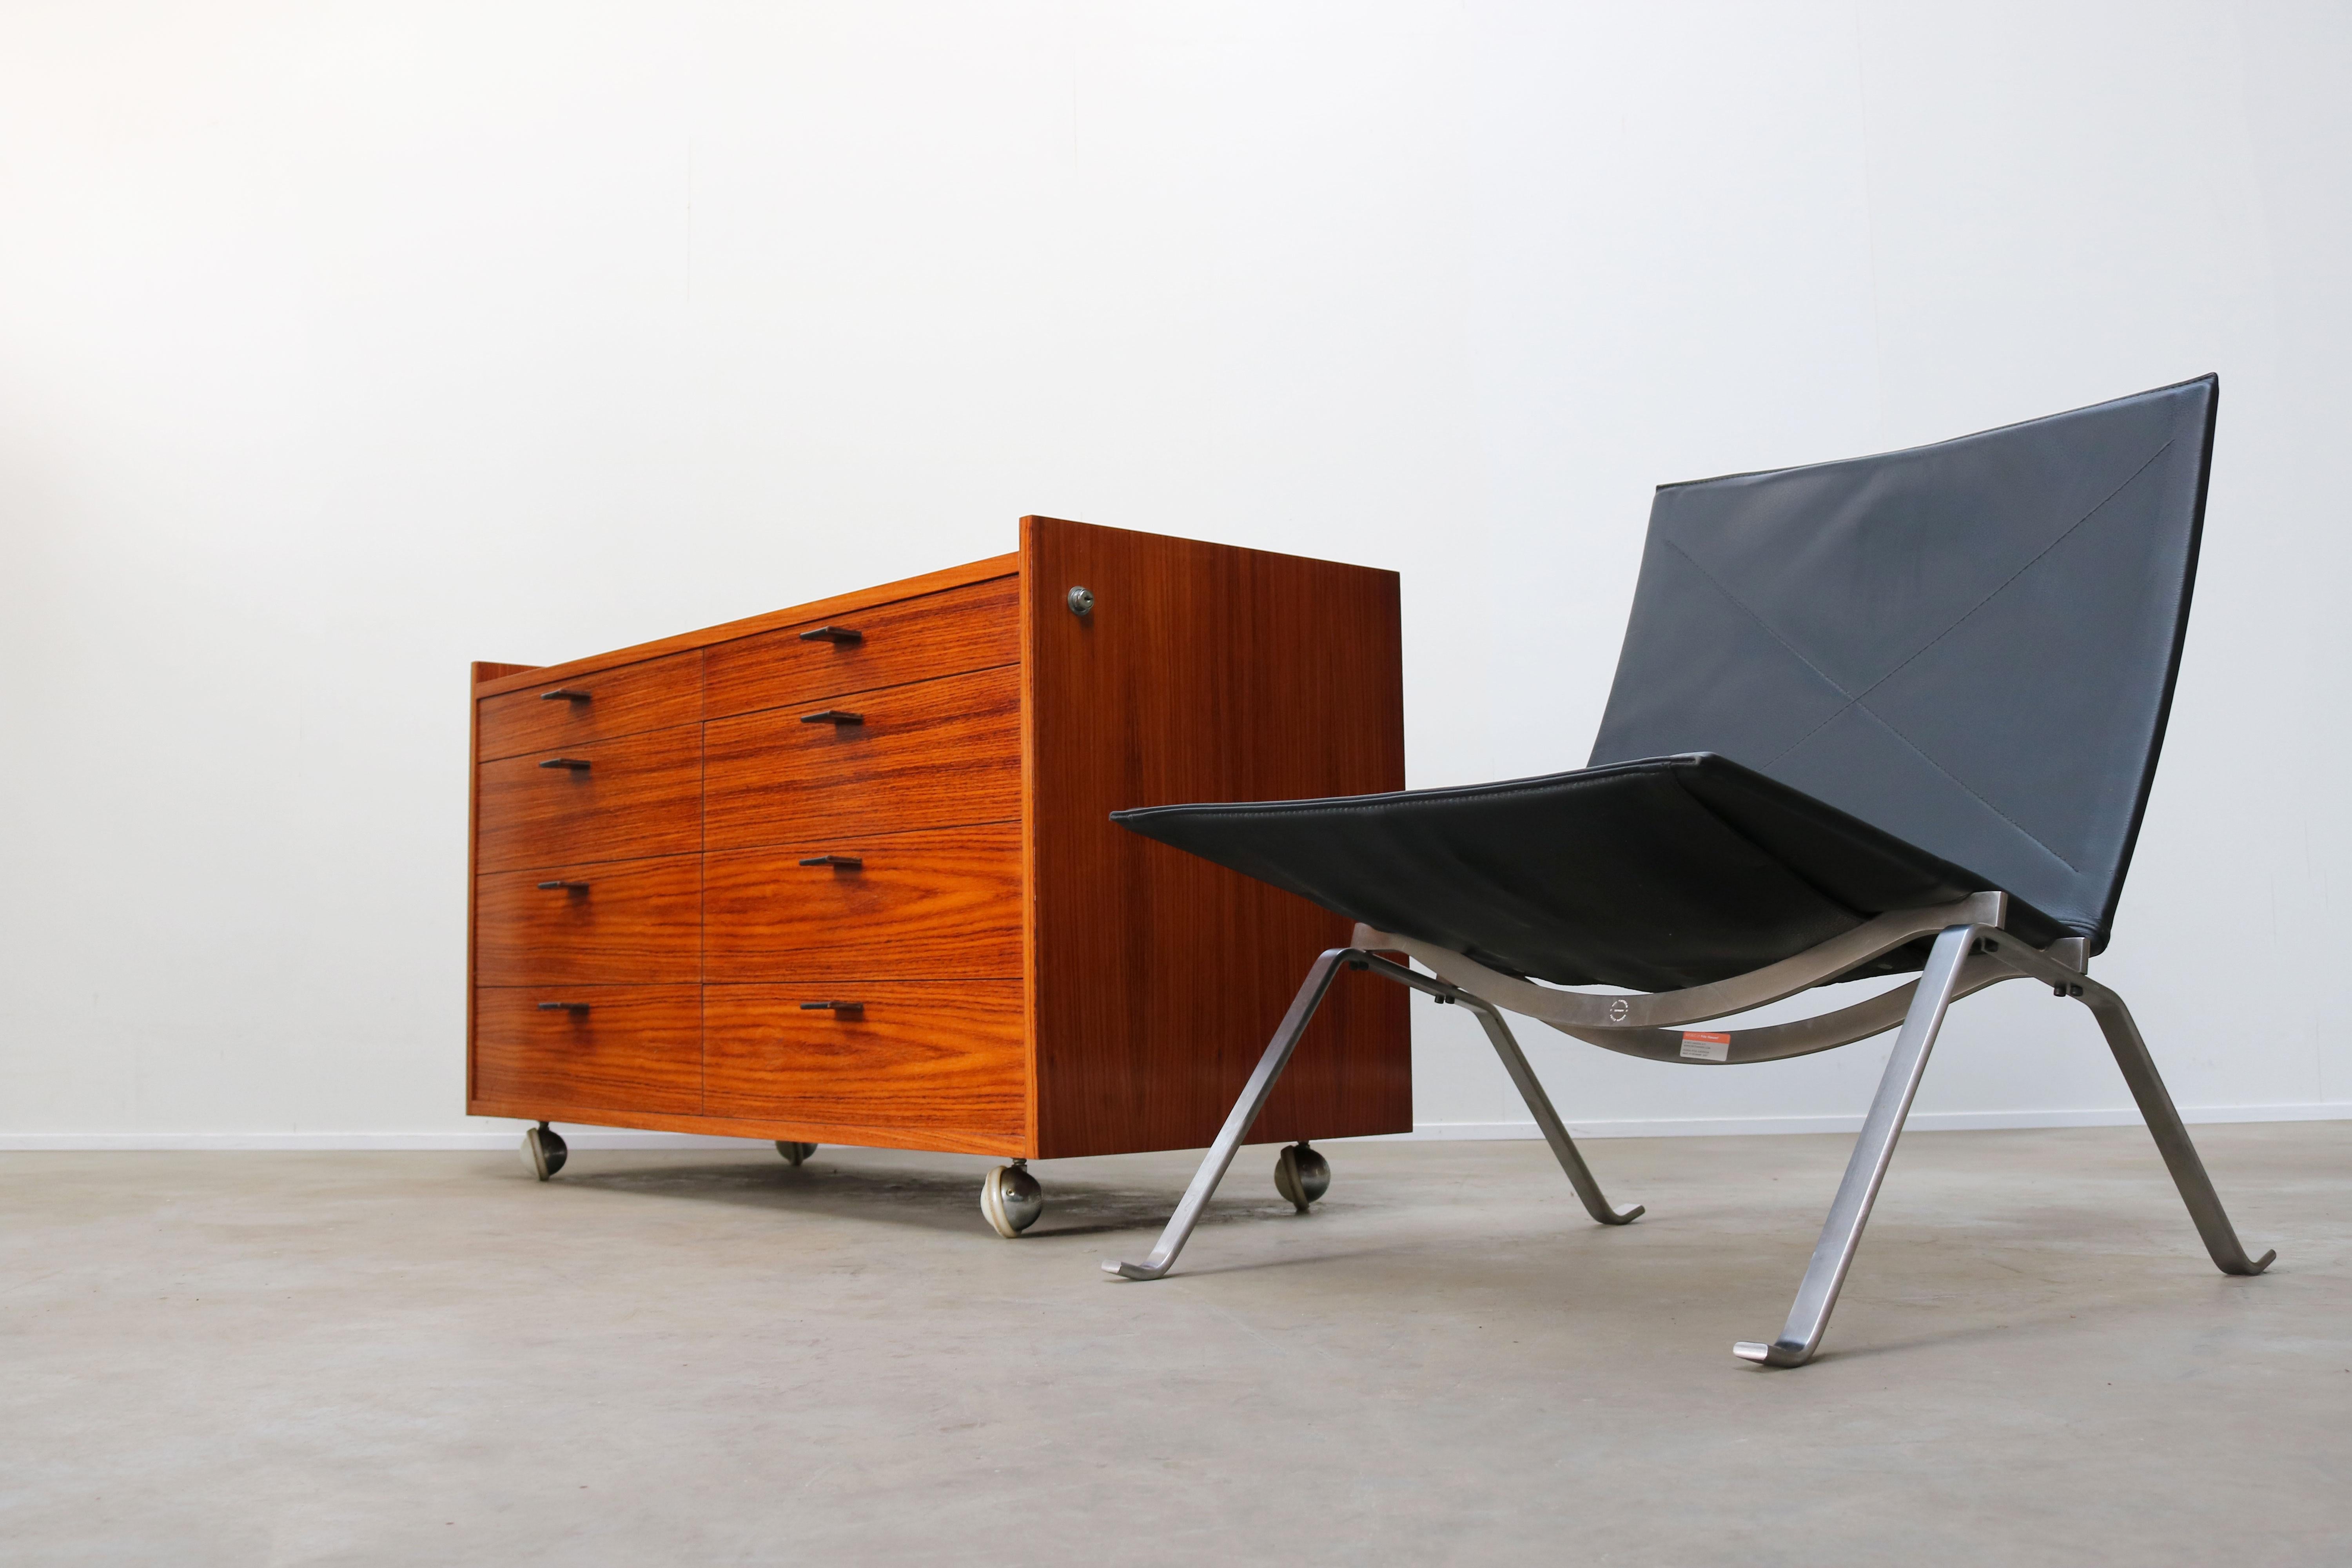 Vintage design cabinet / chest of drawers in rosewood with leather grips designed by Florence Knoll for De Coene Belgium in the 1960s. Wonderful clean minimalist modernist design in rosewood, the piece is covered in rosewood on all sides and can be